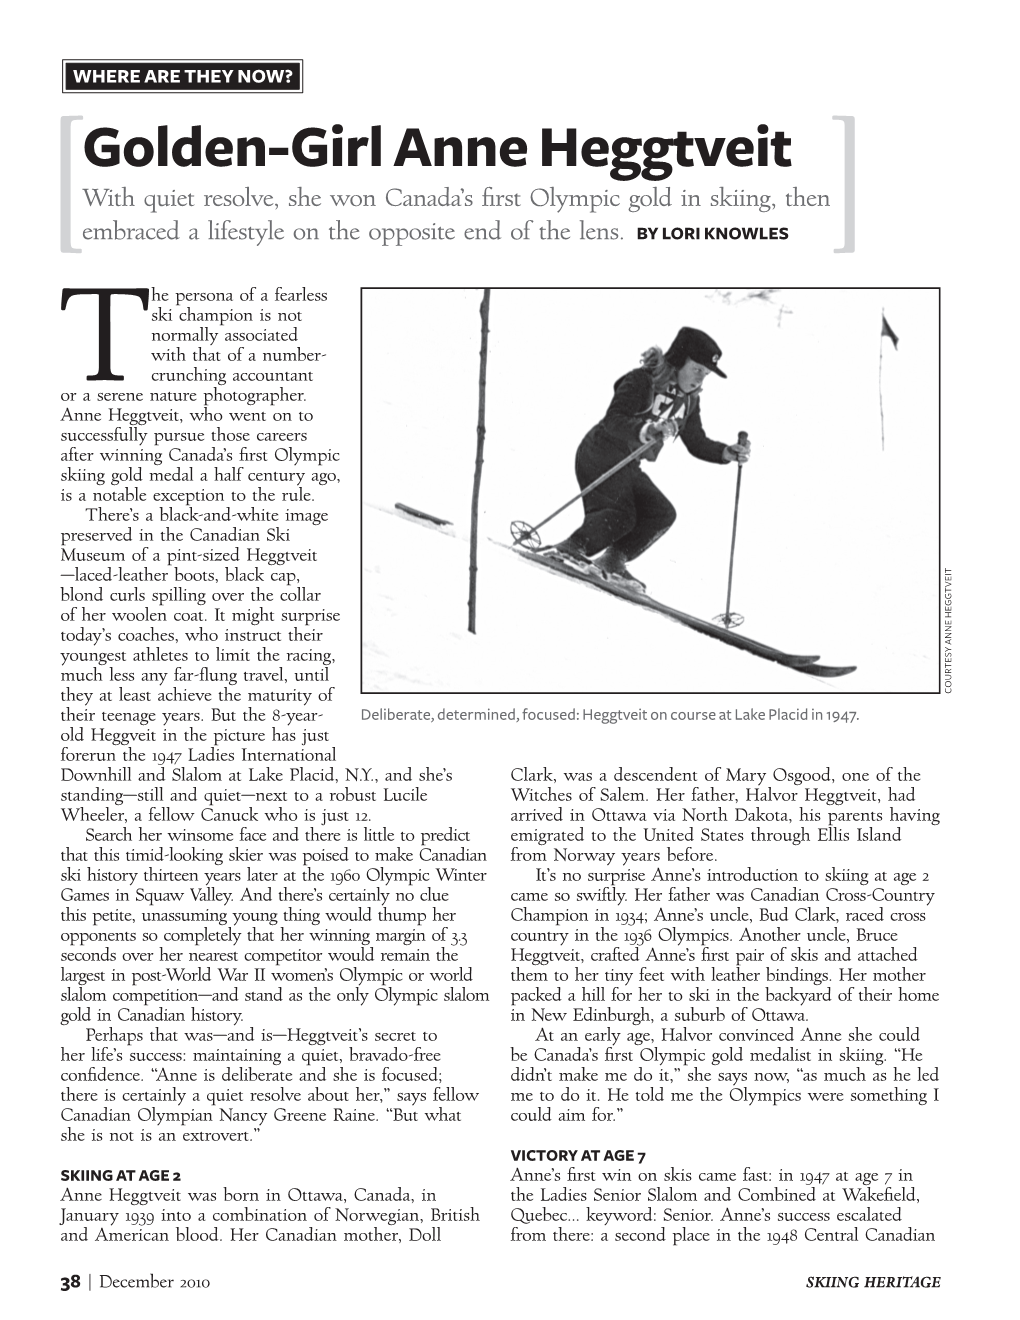 Golden-Girl Anne Heggtveit with Quiet Resolve, She Won Canada’S First Olympic Gold in Skiing, Then Embraced a Lifestyle on the Opposite End of the Lens